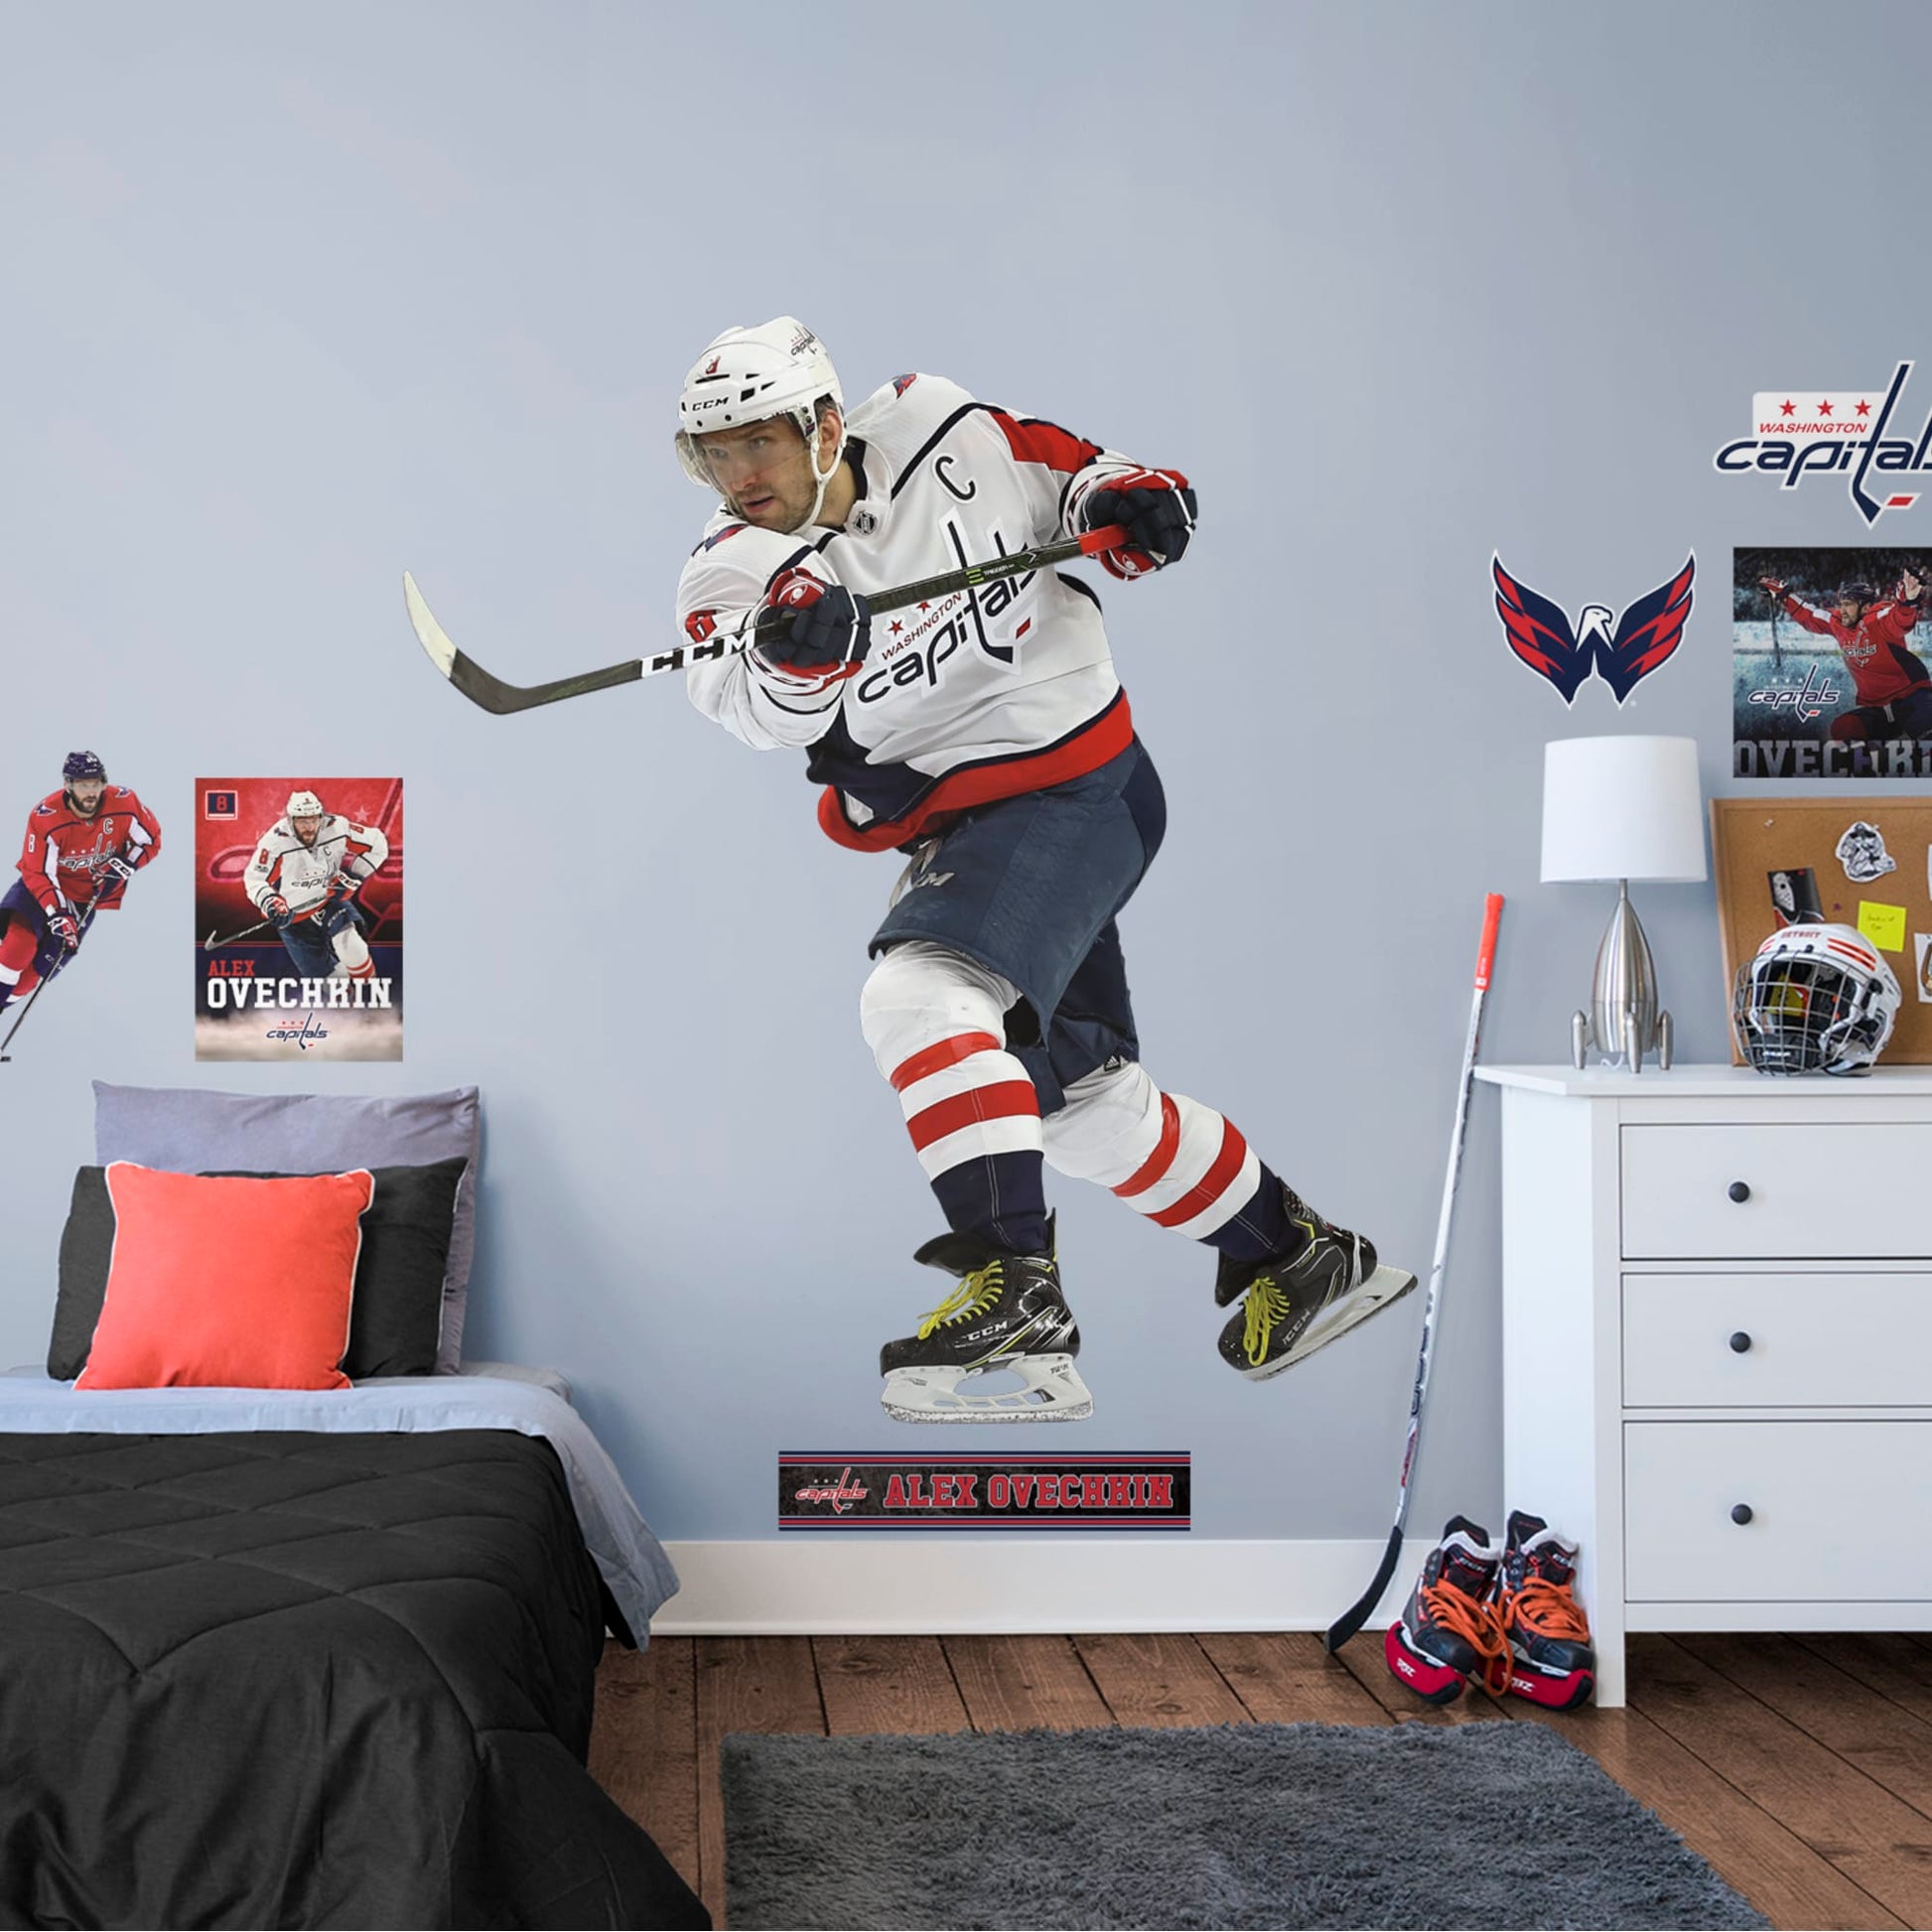 Life-Size Athlete + 2 Decals (67"W x 74"H) History in in the making! One look at his vicious one-timer, and you know Alex Ovechkin is a living legend on ice. Well on his way to being the greatest goal scorer in the NHL, Ovi is giving Gretzky a run for his money. Cheer on the Capitals and your favorite left winger with a high-grade vinyl reusable decal of the Great Eight.